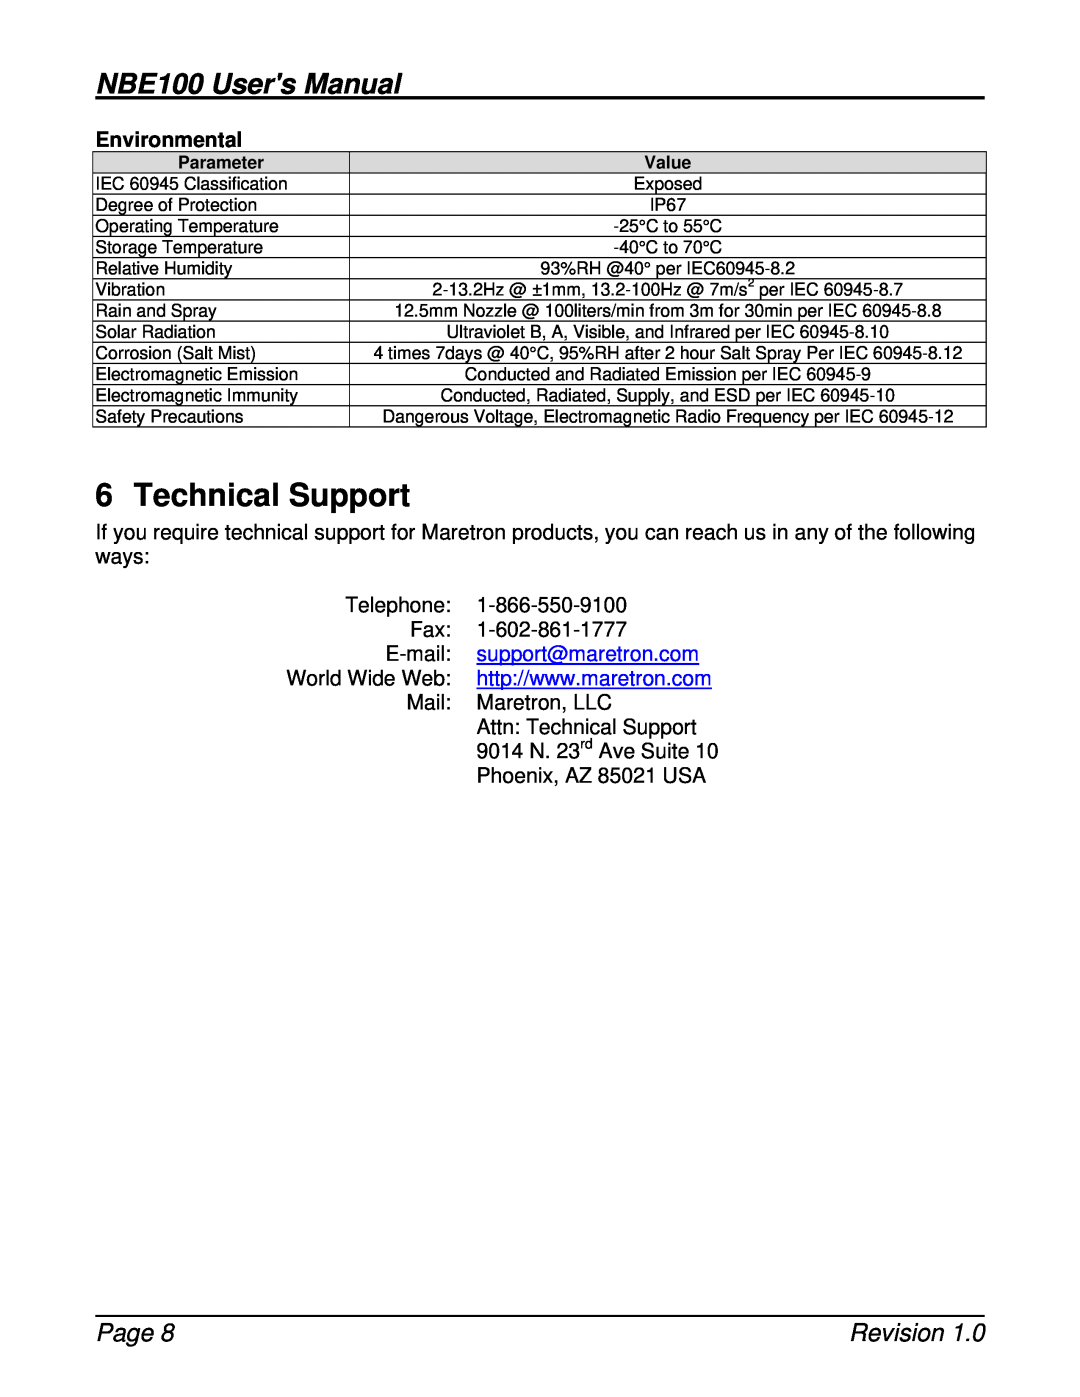 Maretron NBE100 user manual Technical Support, Environmental, Page, Revision, support@maretron.com 